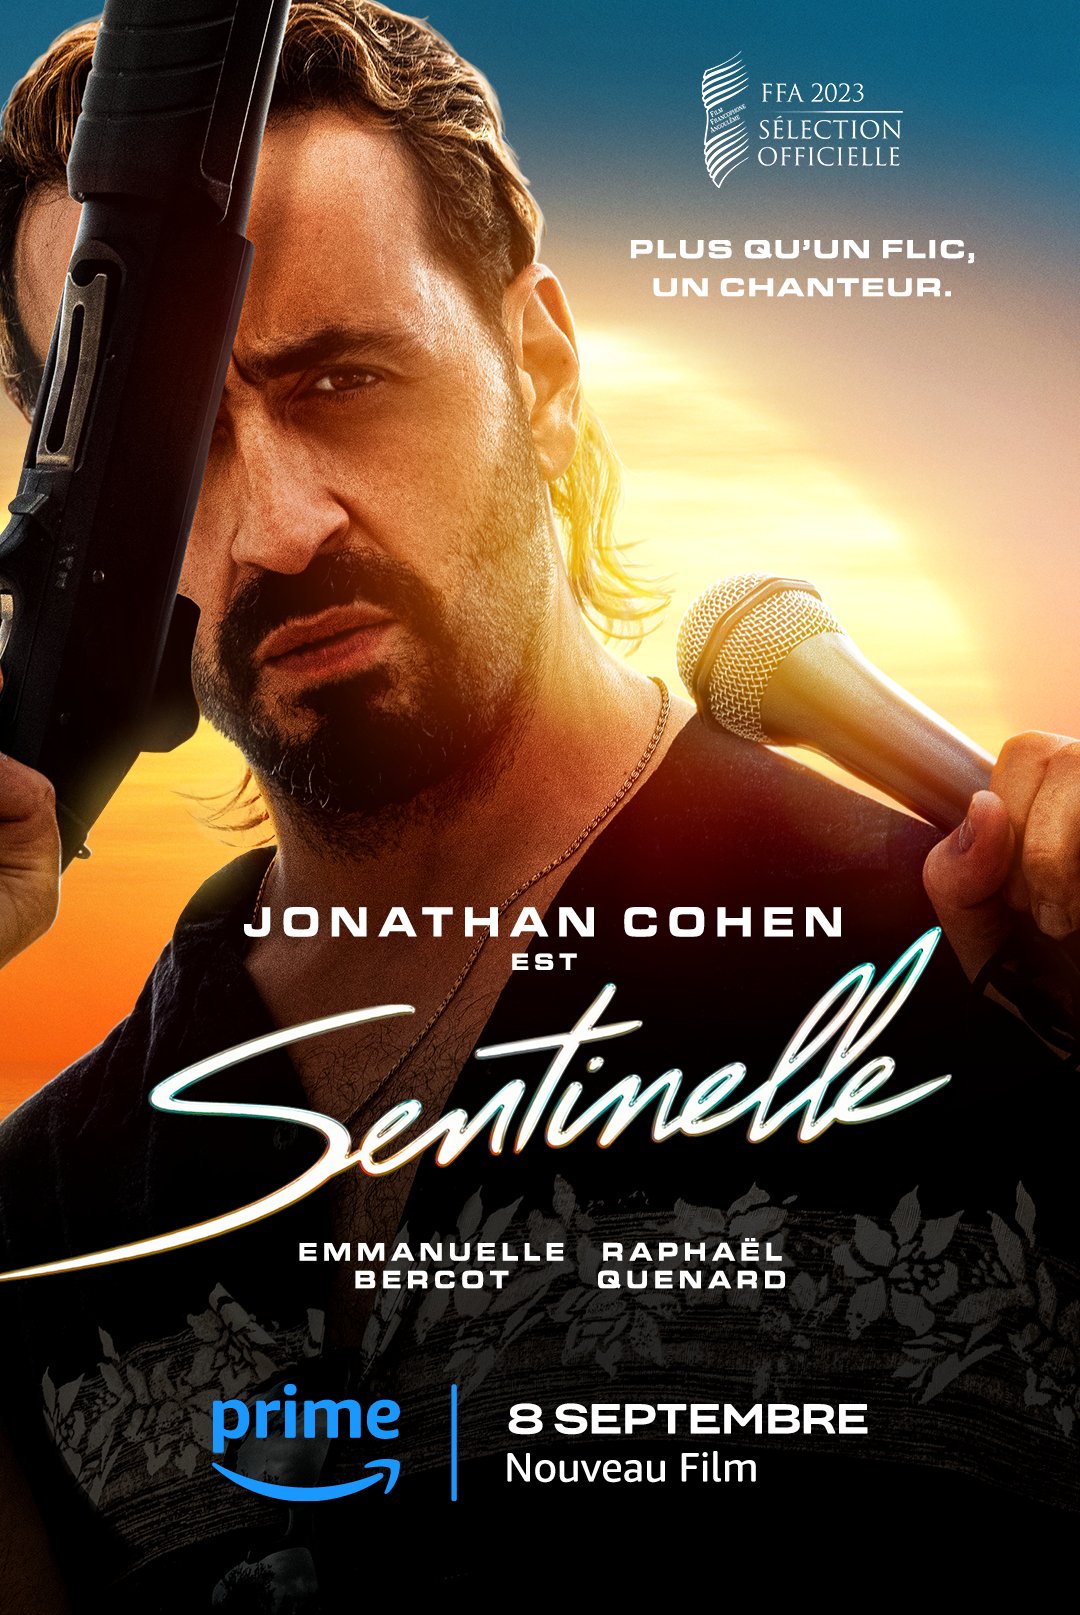 Sentinelle streaming